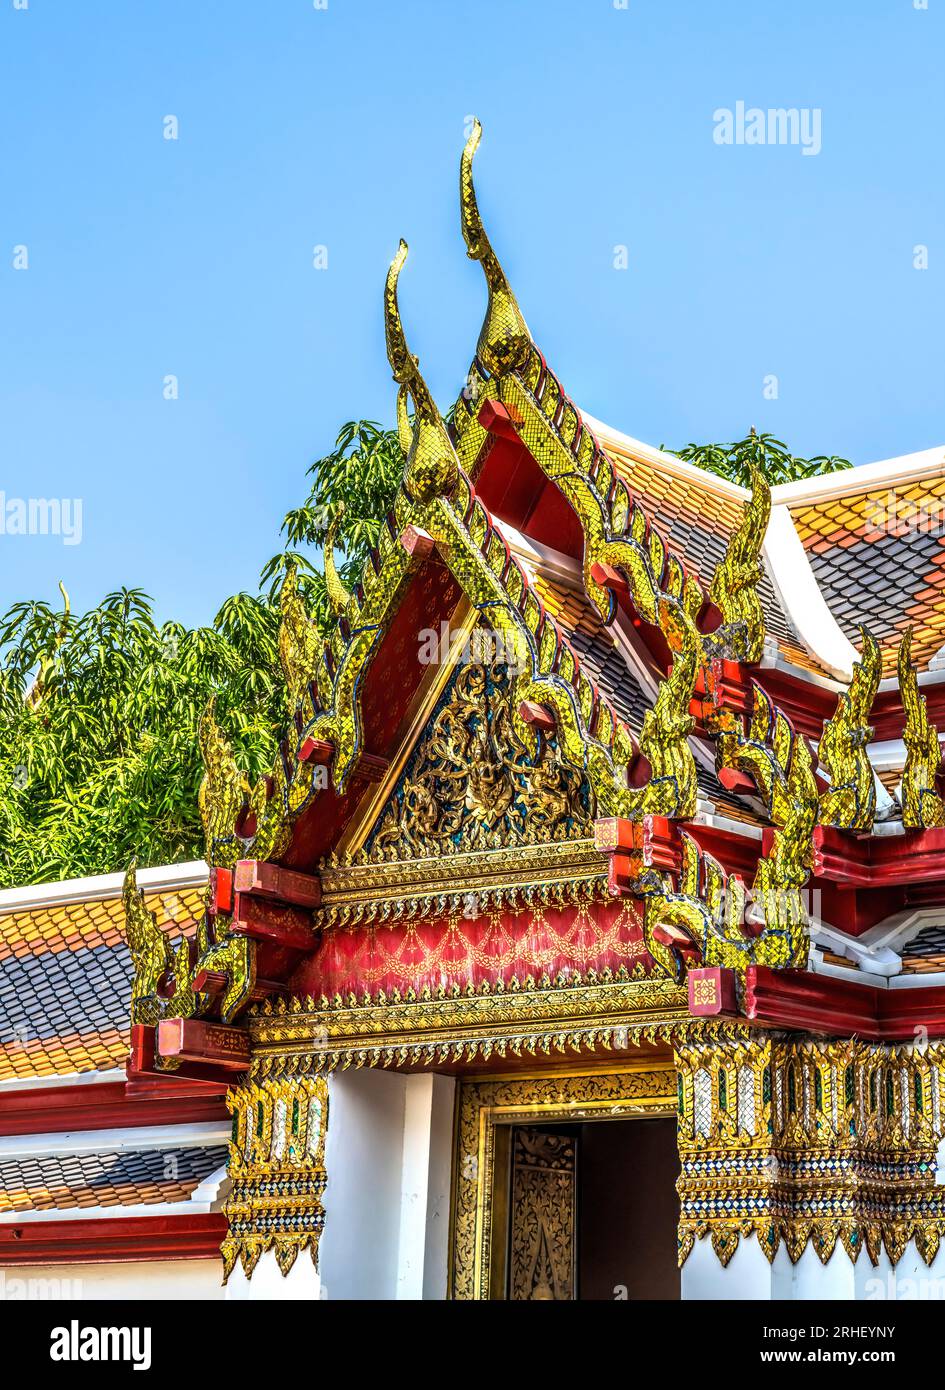 Golden Red Buddha Relief Pavilion Roof Wat Pho Po Temple Complex Bangkok Thailand. Built in 1600s. One of oldest temples in Thailand. Stock Photo